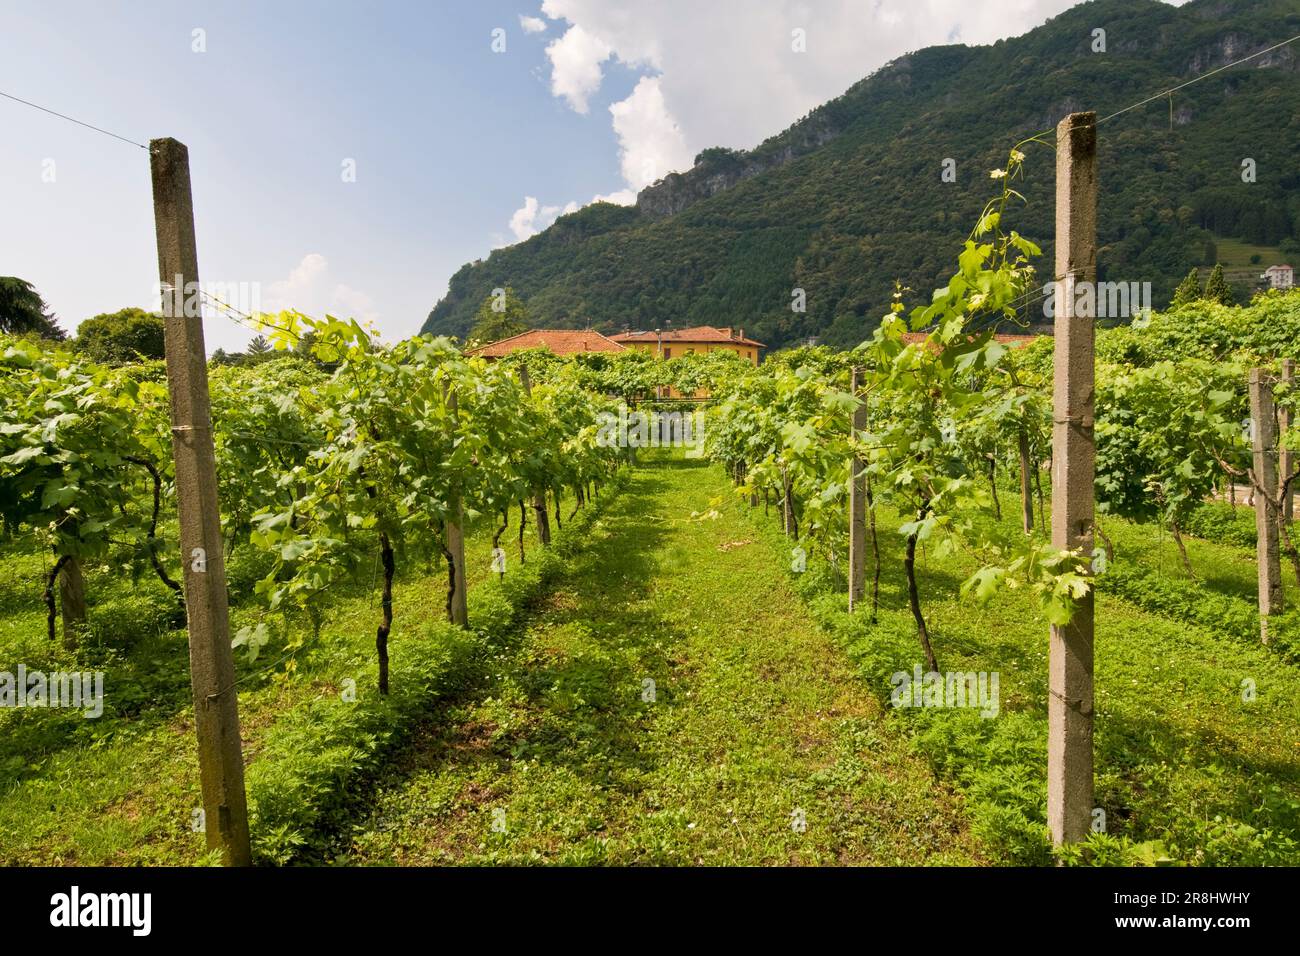 Vineyard. Convent of Our Lady of Tears. Convent of Madonna Delle Lacrime. Dongo. Como Lake. Italy Stock Photo